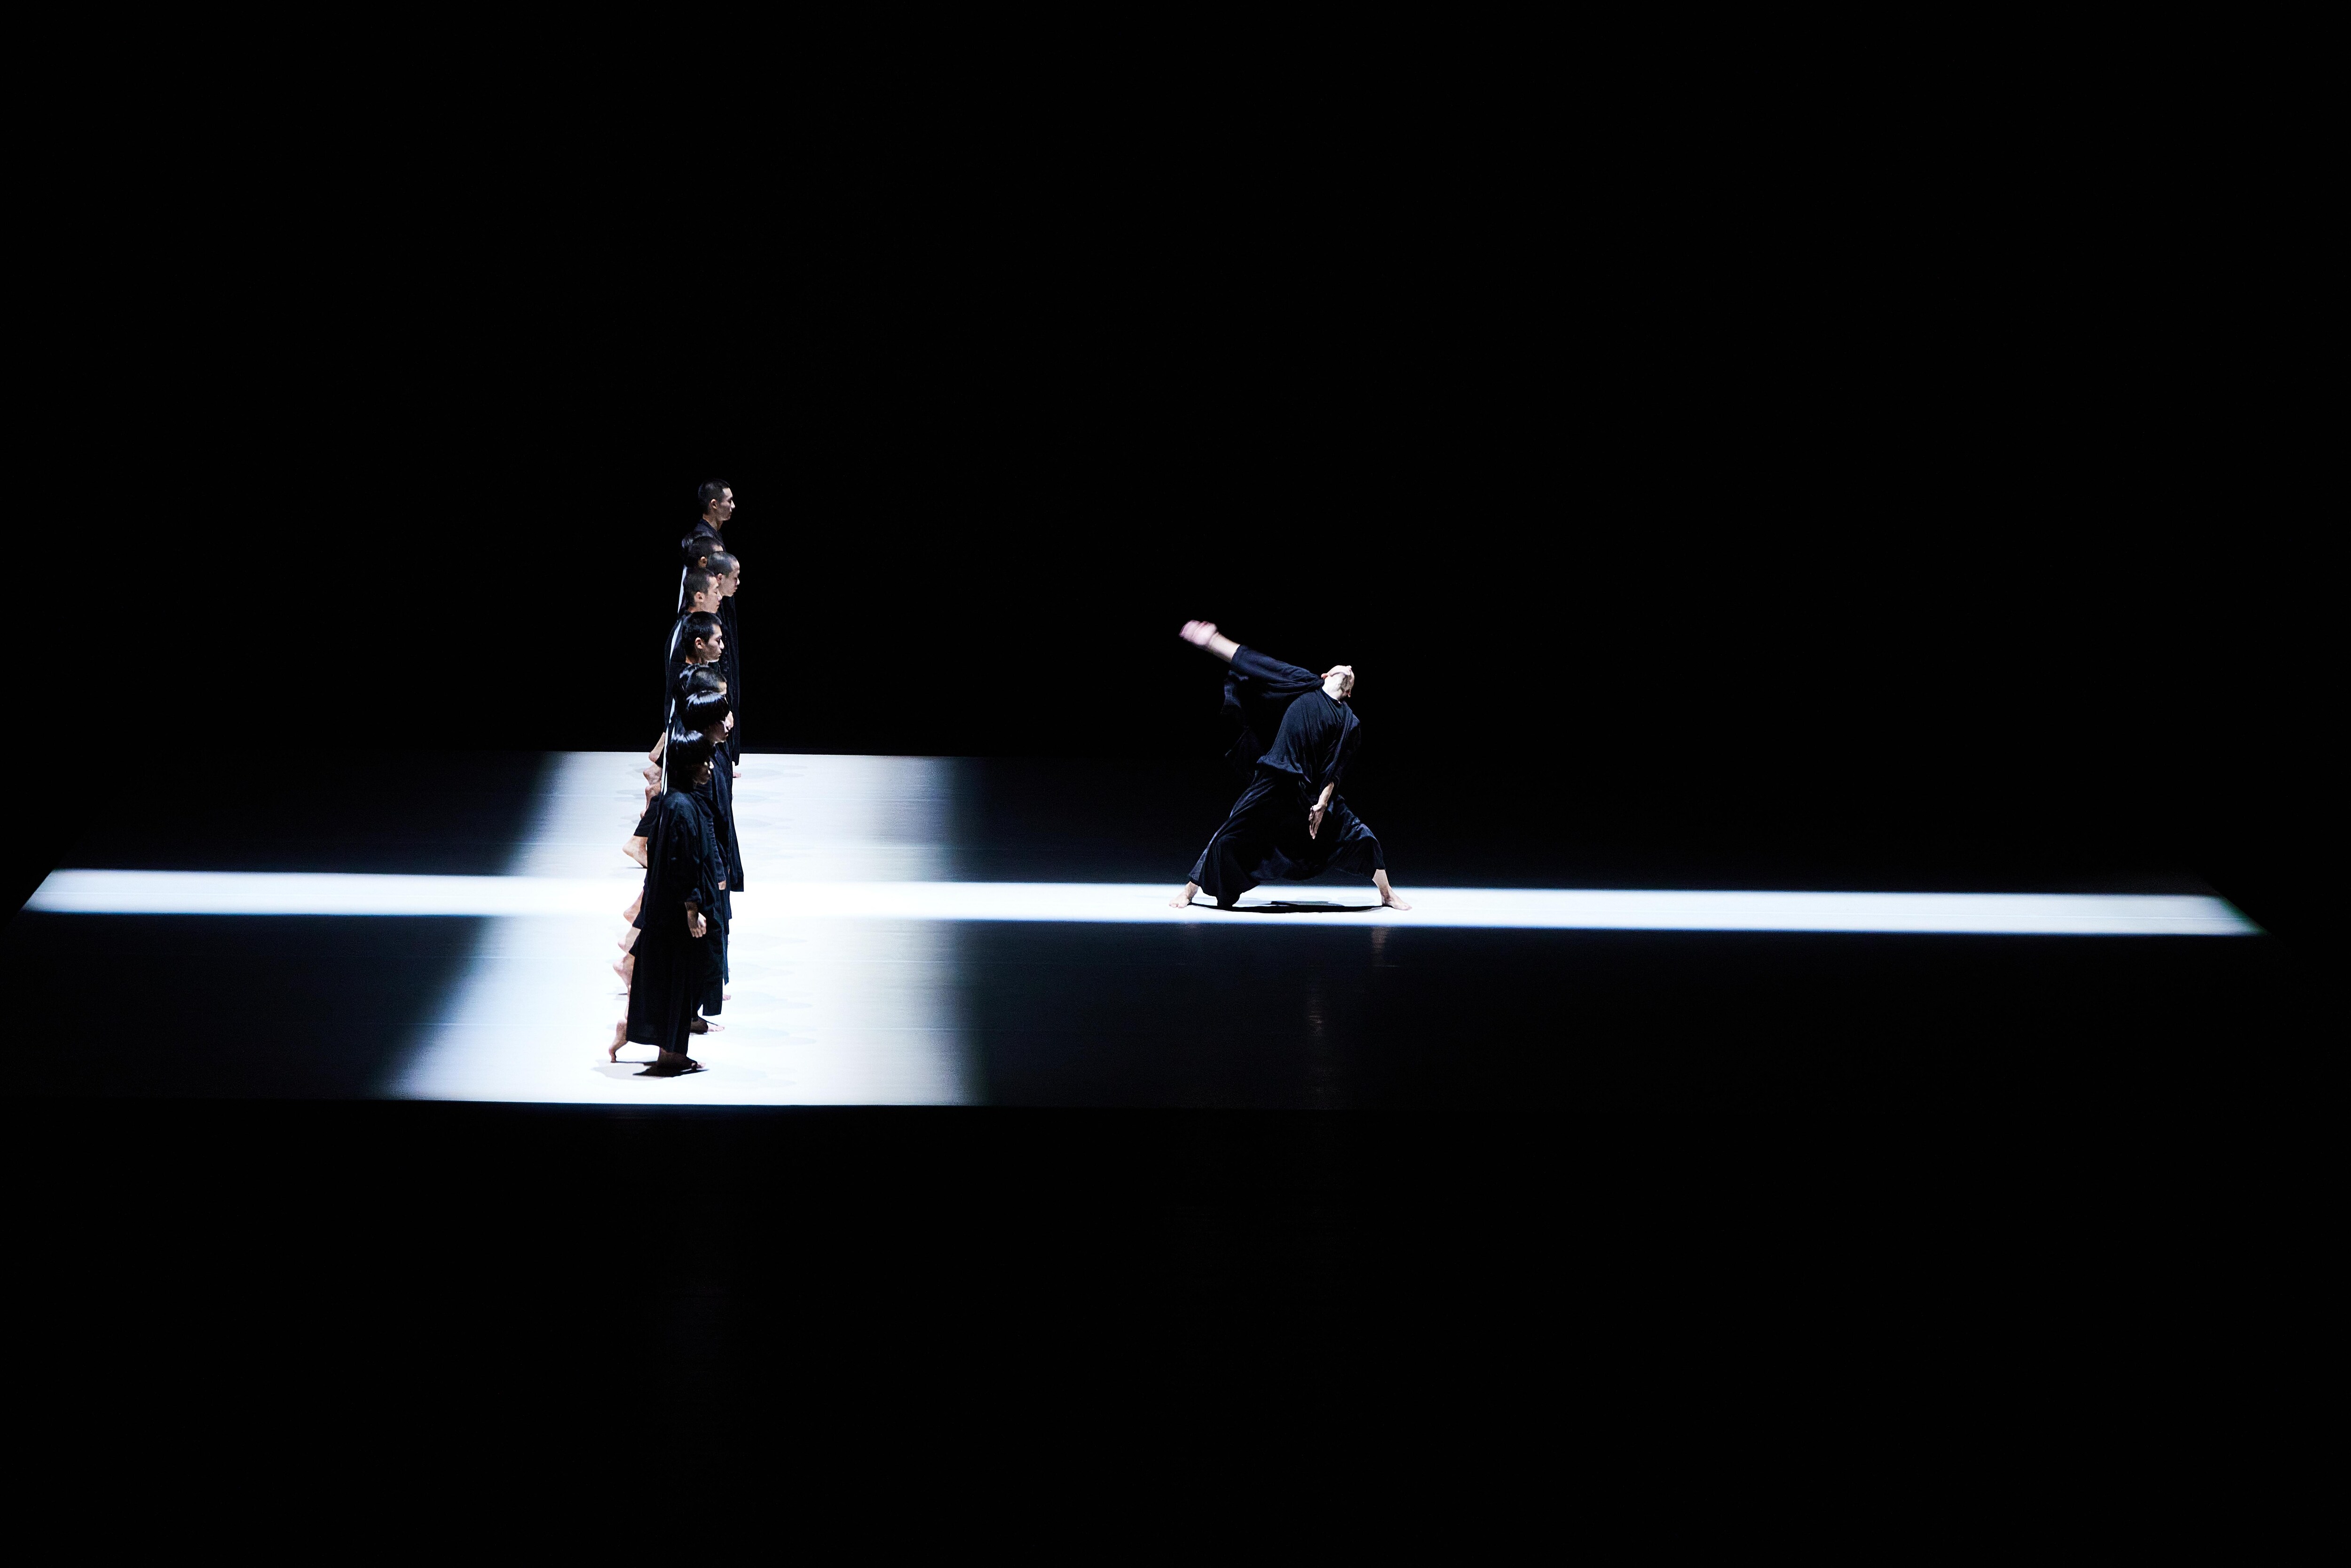 Dancers in a line on a white path of light, facing another dancer on a light path, alone